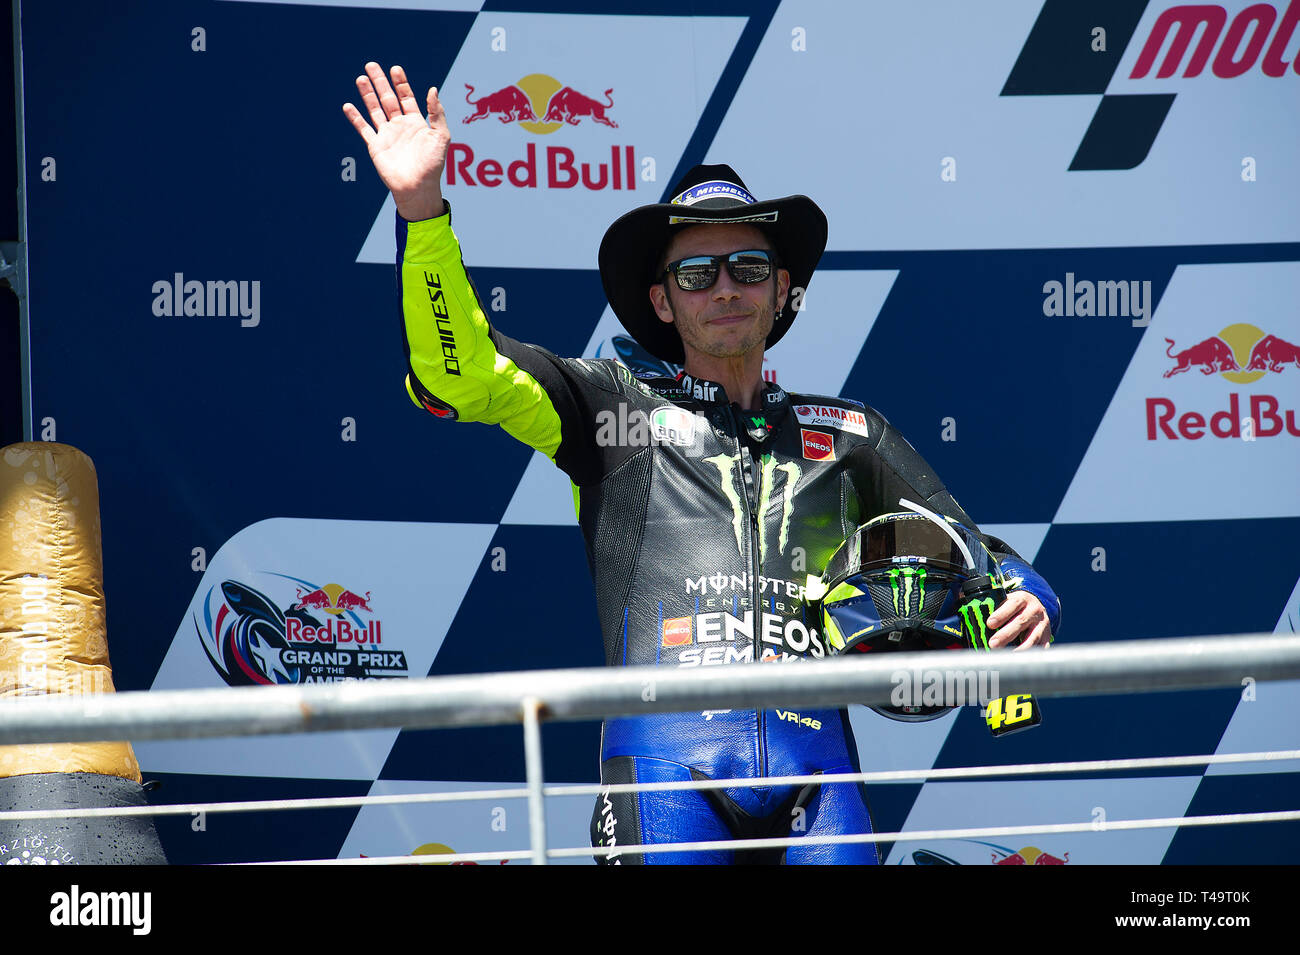 Valentino rossi monster energy yamaha motogp team hi-res photography and images - Page 2 -